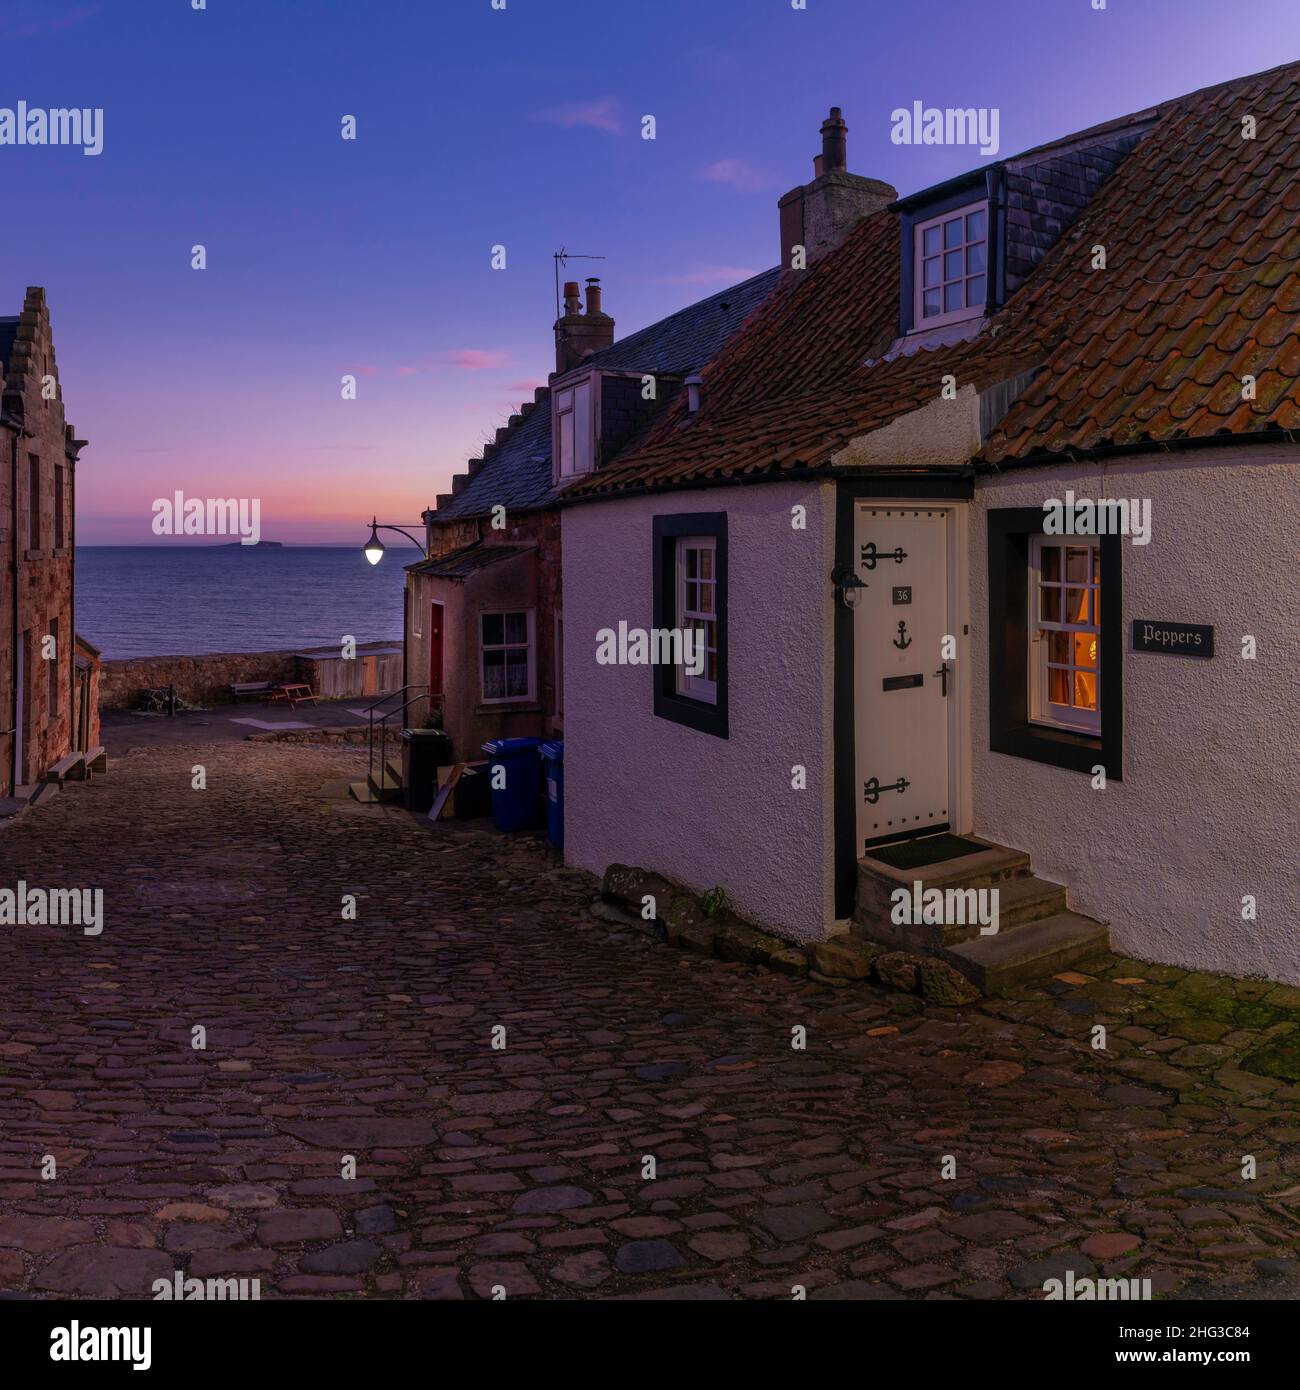 A view down a cobbled street, looking out towards the Isle of May in the River Forth, in the East Neuk village of Crail, Fife, Scotland Stock Photo